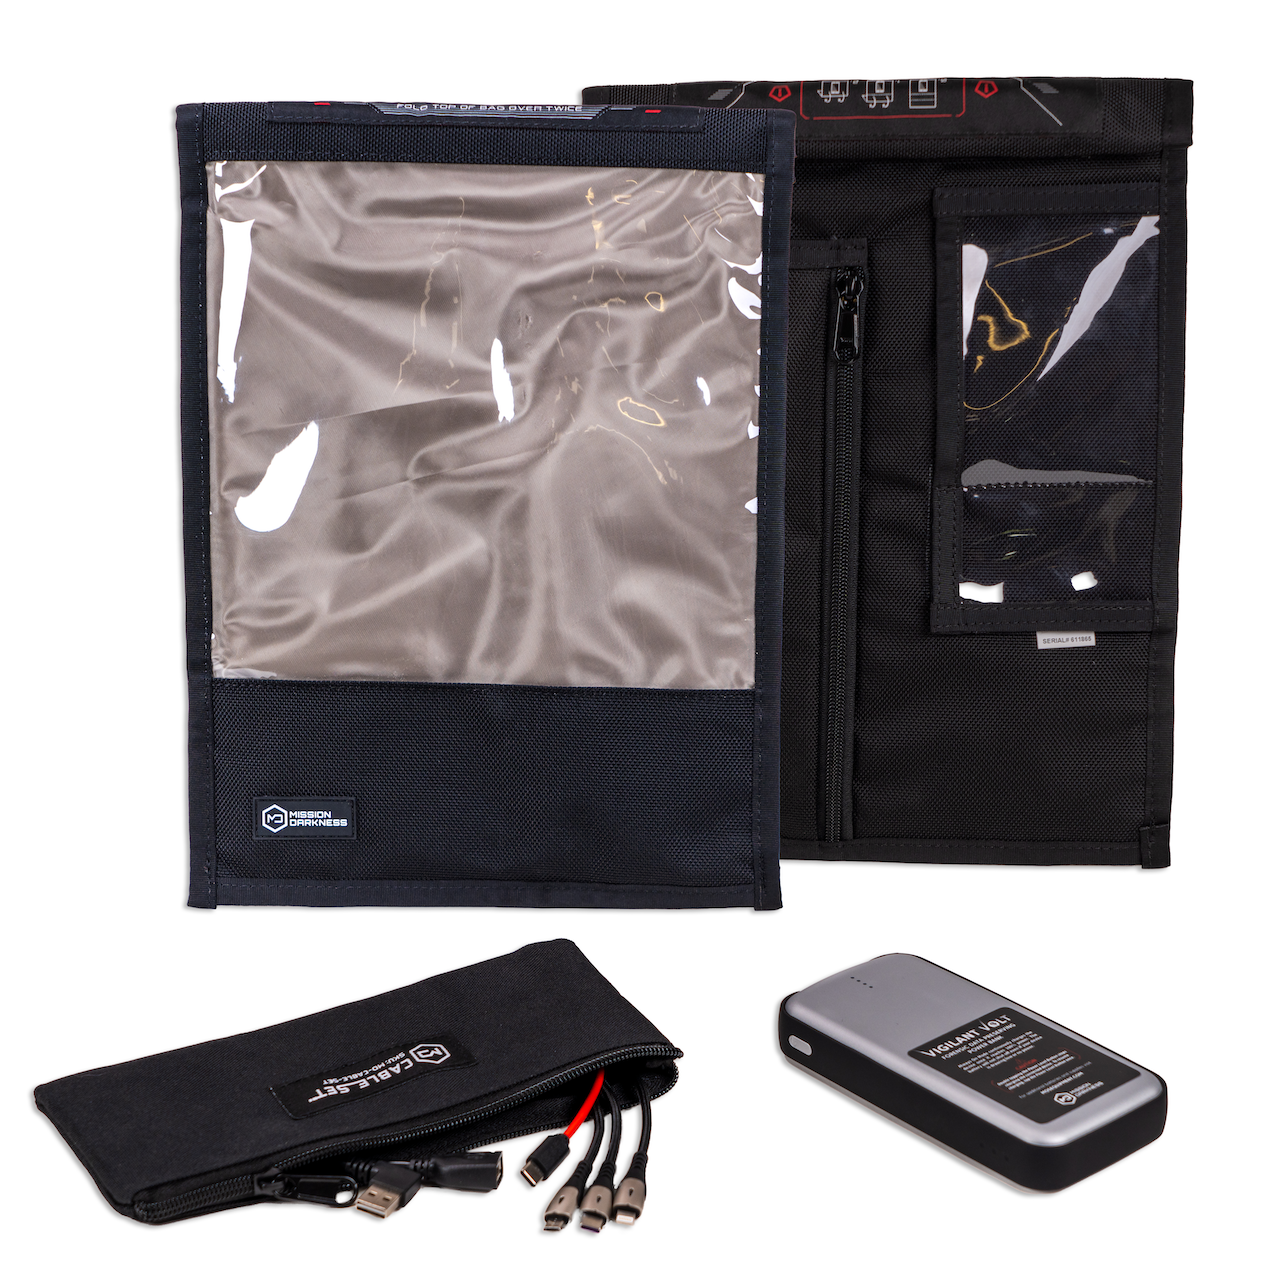 Mission Darkness NeoLok Faraday Bag for Tablets with Battery Kit